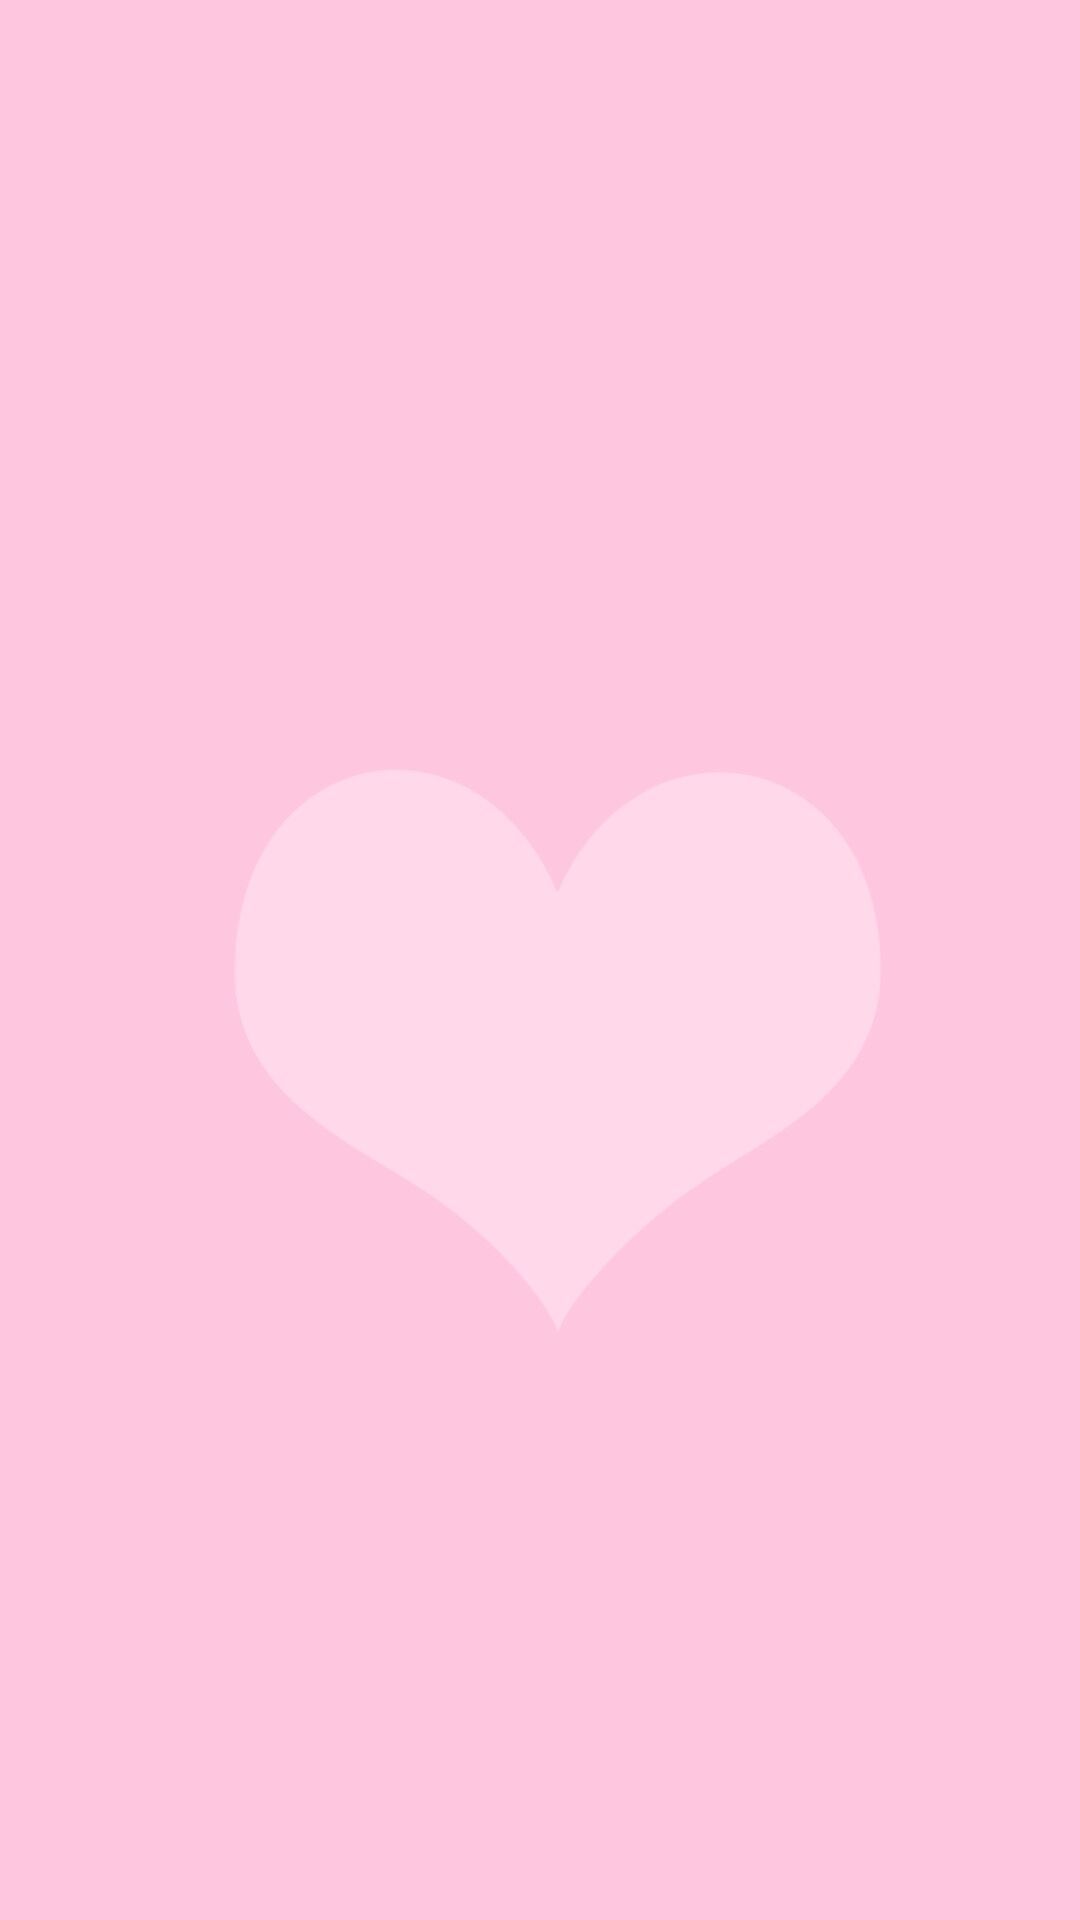 Cute Heart Wallpaper For IPhone 71 images